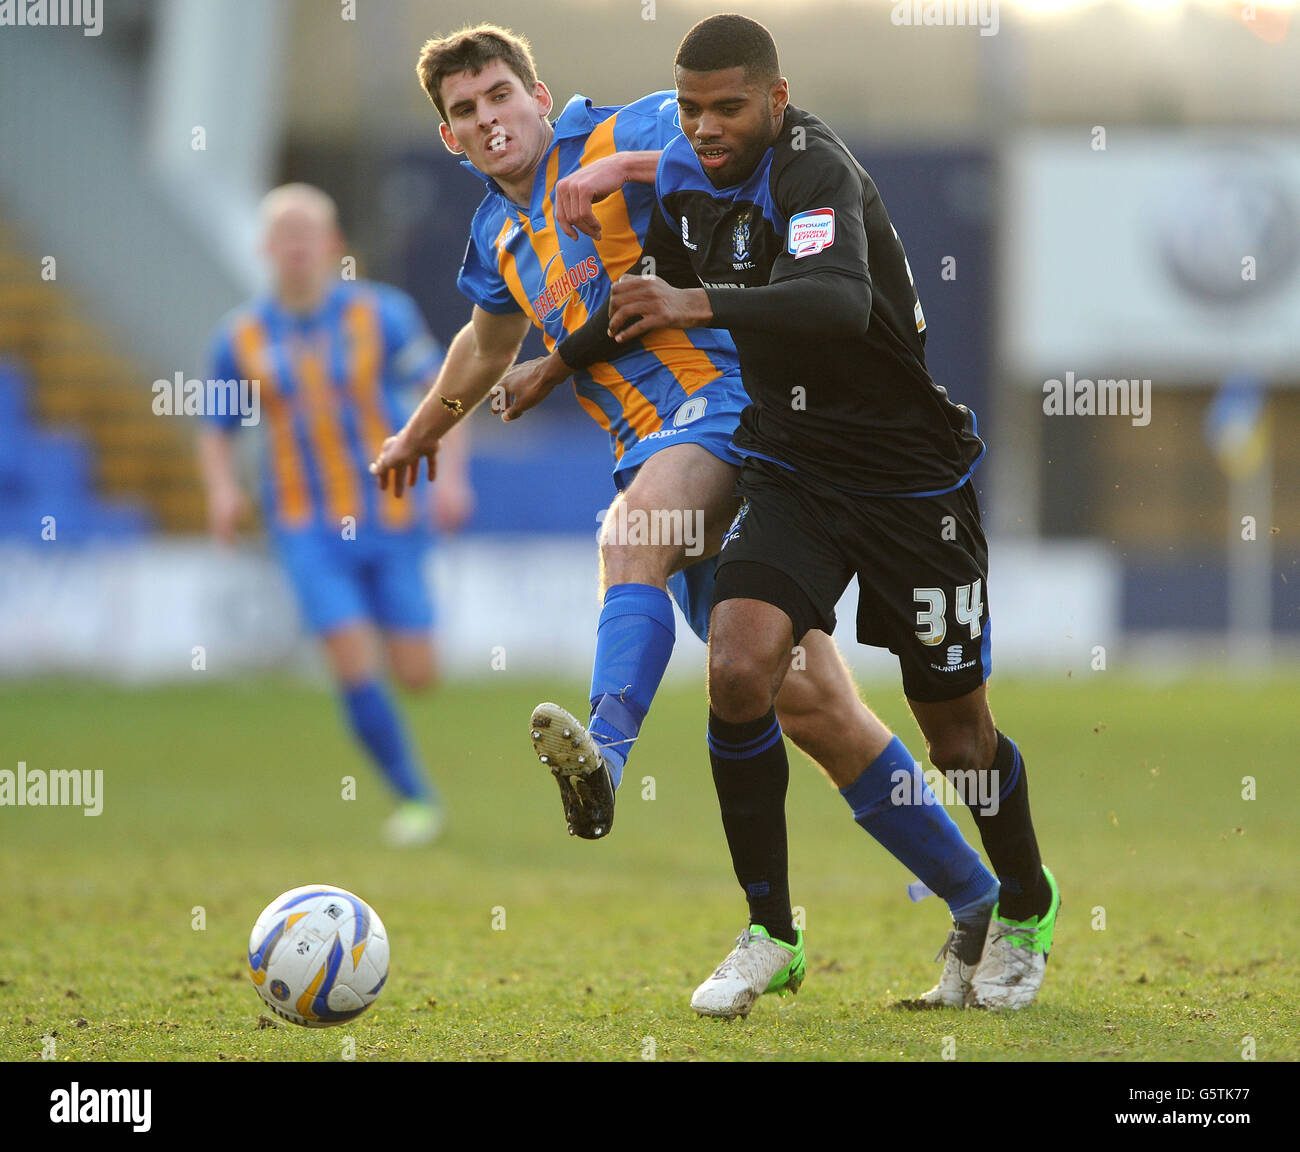 Shrewsbury Town's David McAllister (left) and Bury's Ethan Ebanks-Lander (right) battle for the ball during the npower Football League One match at Greenhous Meadow, Shrewsbury. Stock Photo